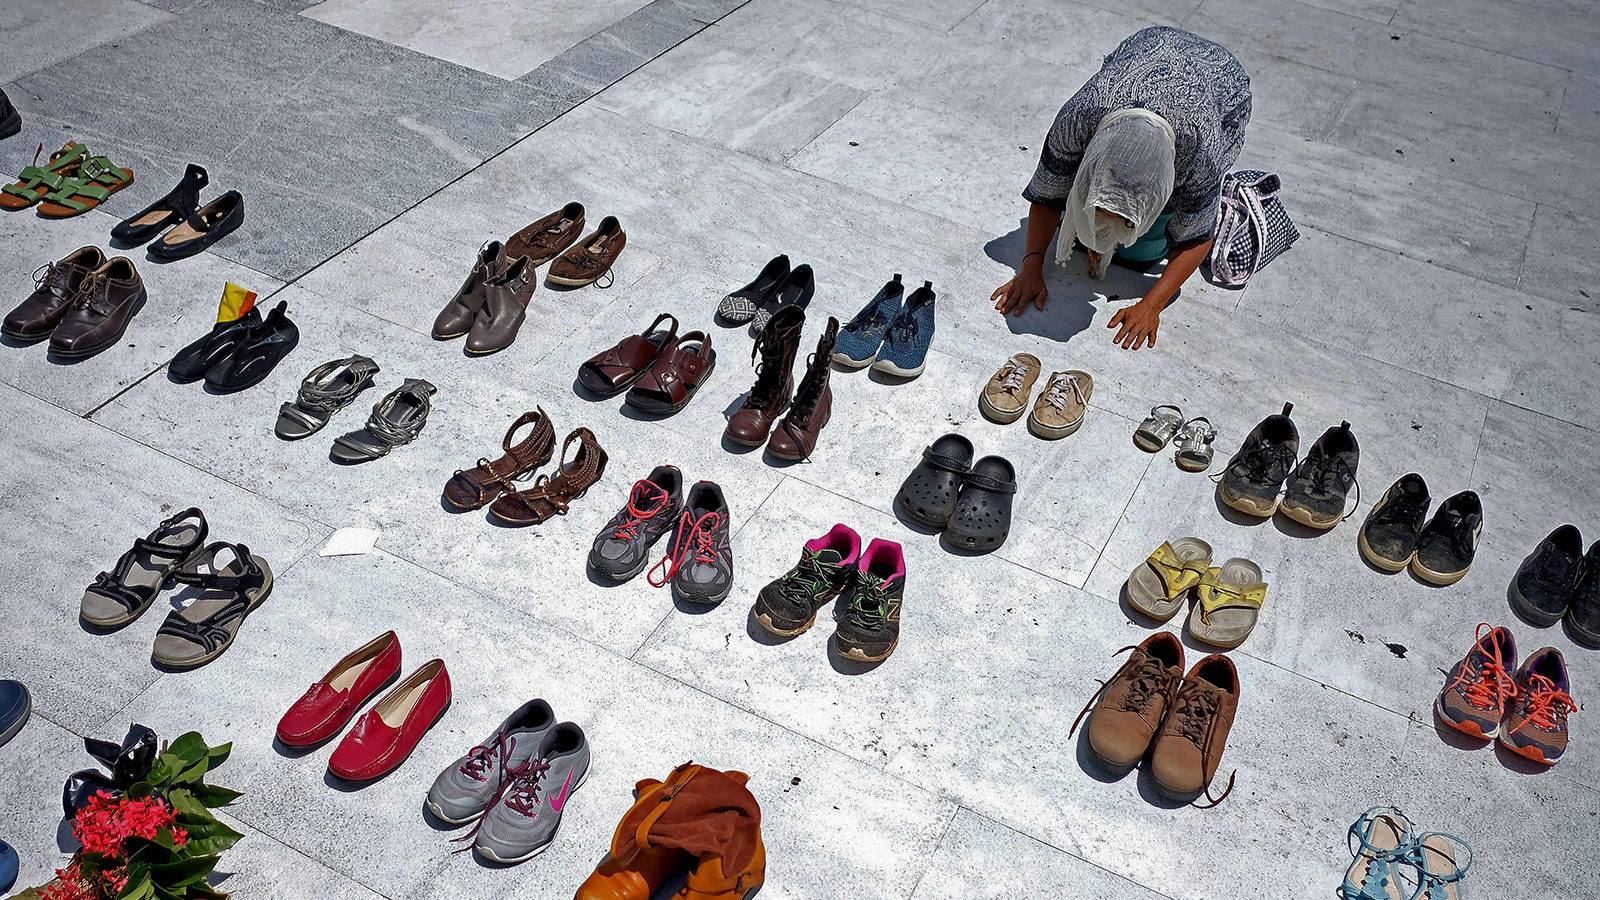 A woman prays in front of hundreds of shoes that were displayed in memory of those killed by Hurricane Maria in front of the Puerto Rican Capitol, in San Juan on June 1, 2018.